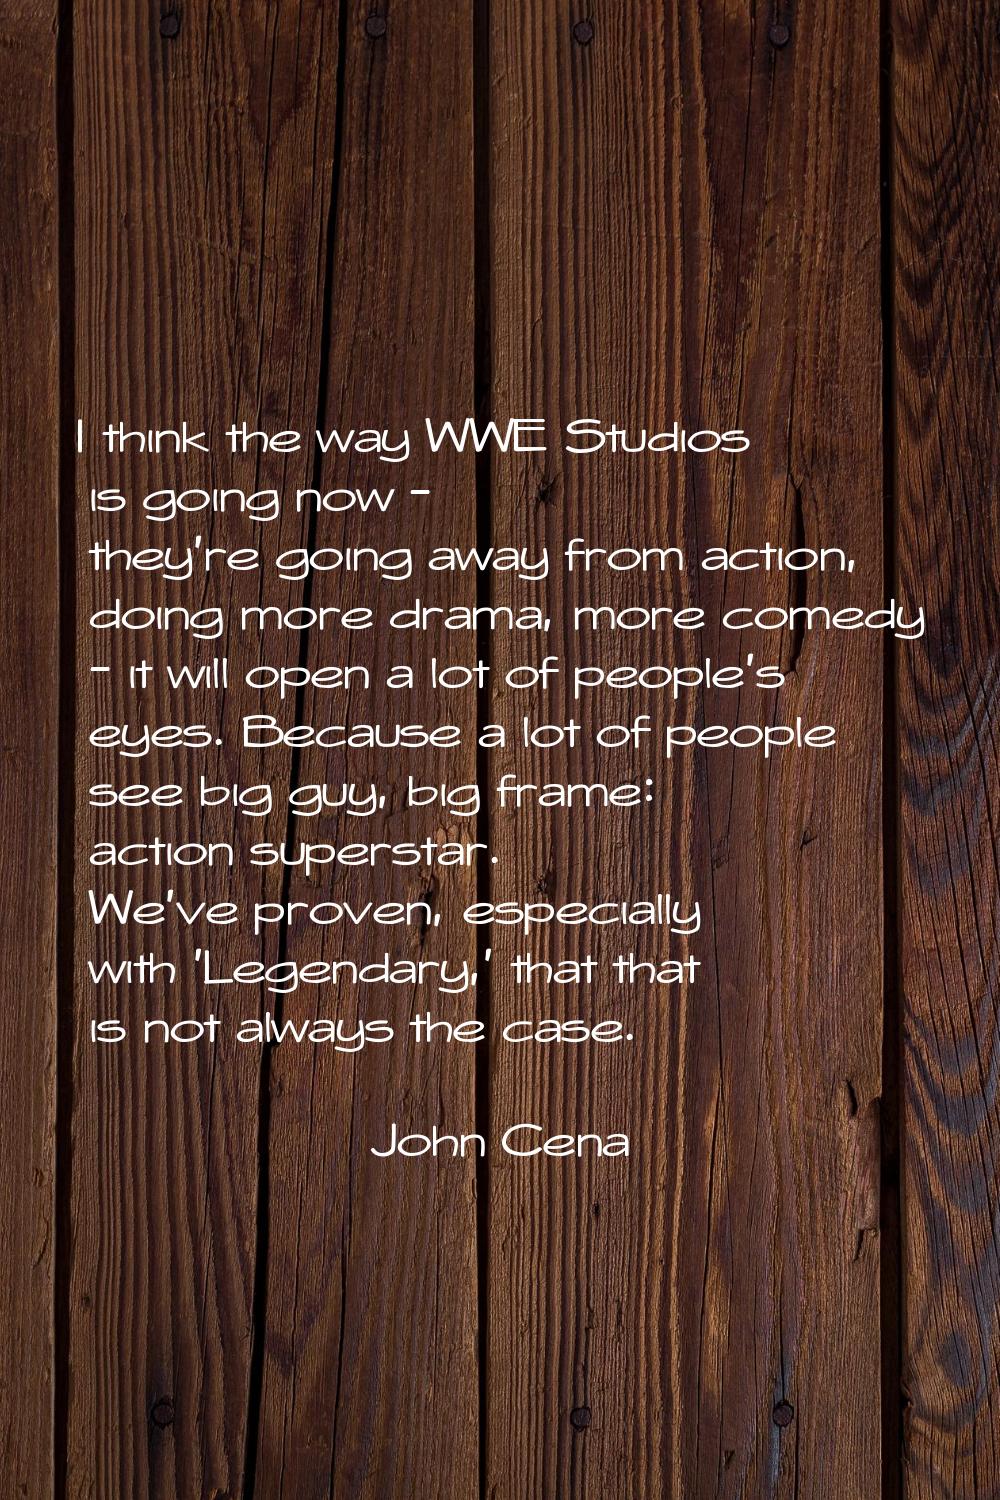 I think the way WWE Studios is going now - they're going away from action, doing more drama, more c